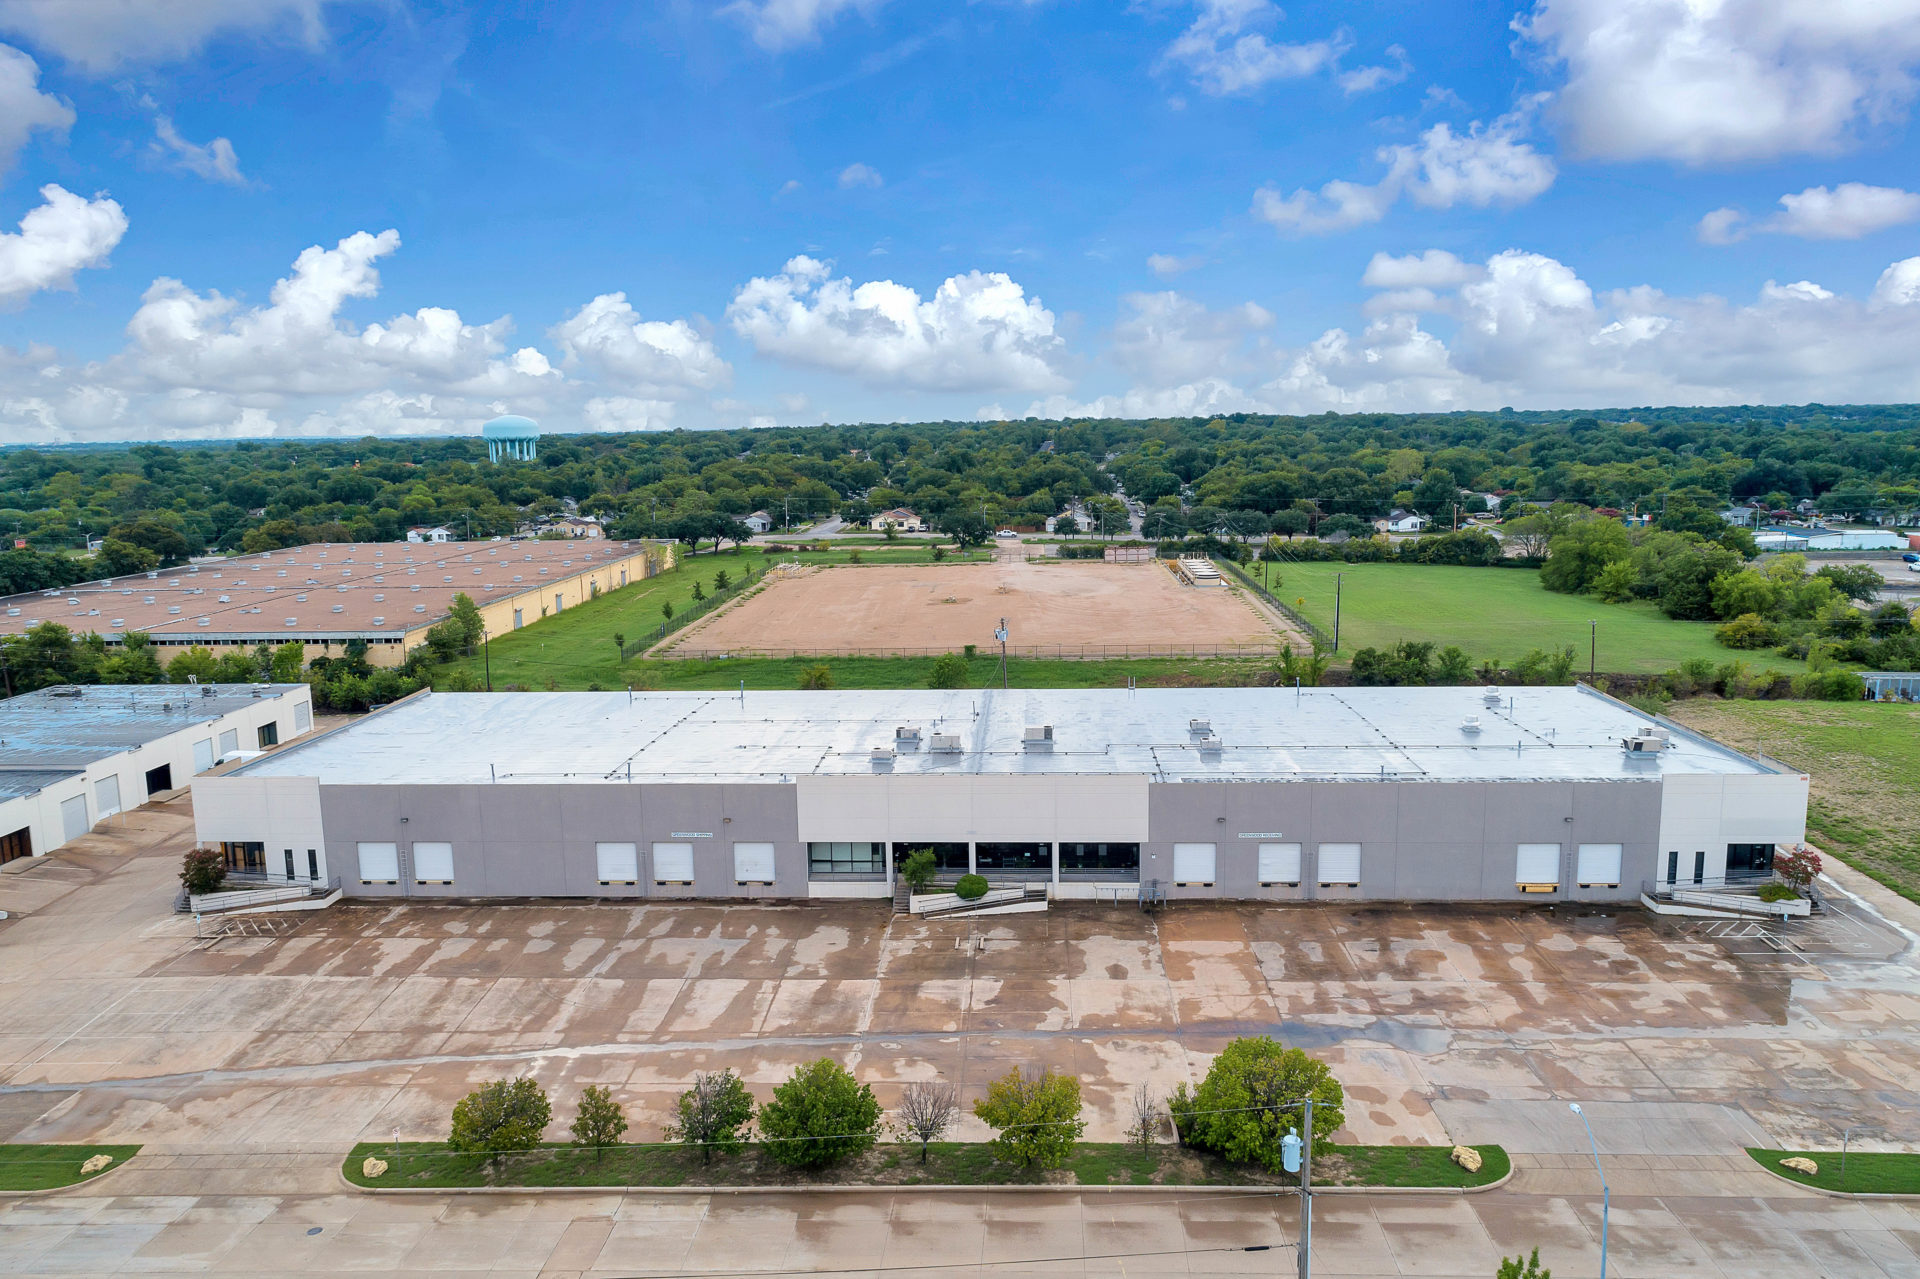 Aerial view of one building in the Suffolk Business Park with grey and white siding, entrance ramps, and loading docks